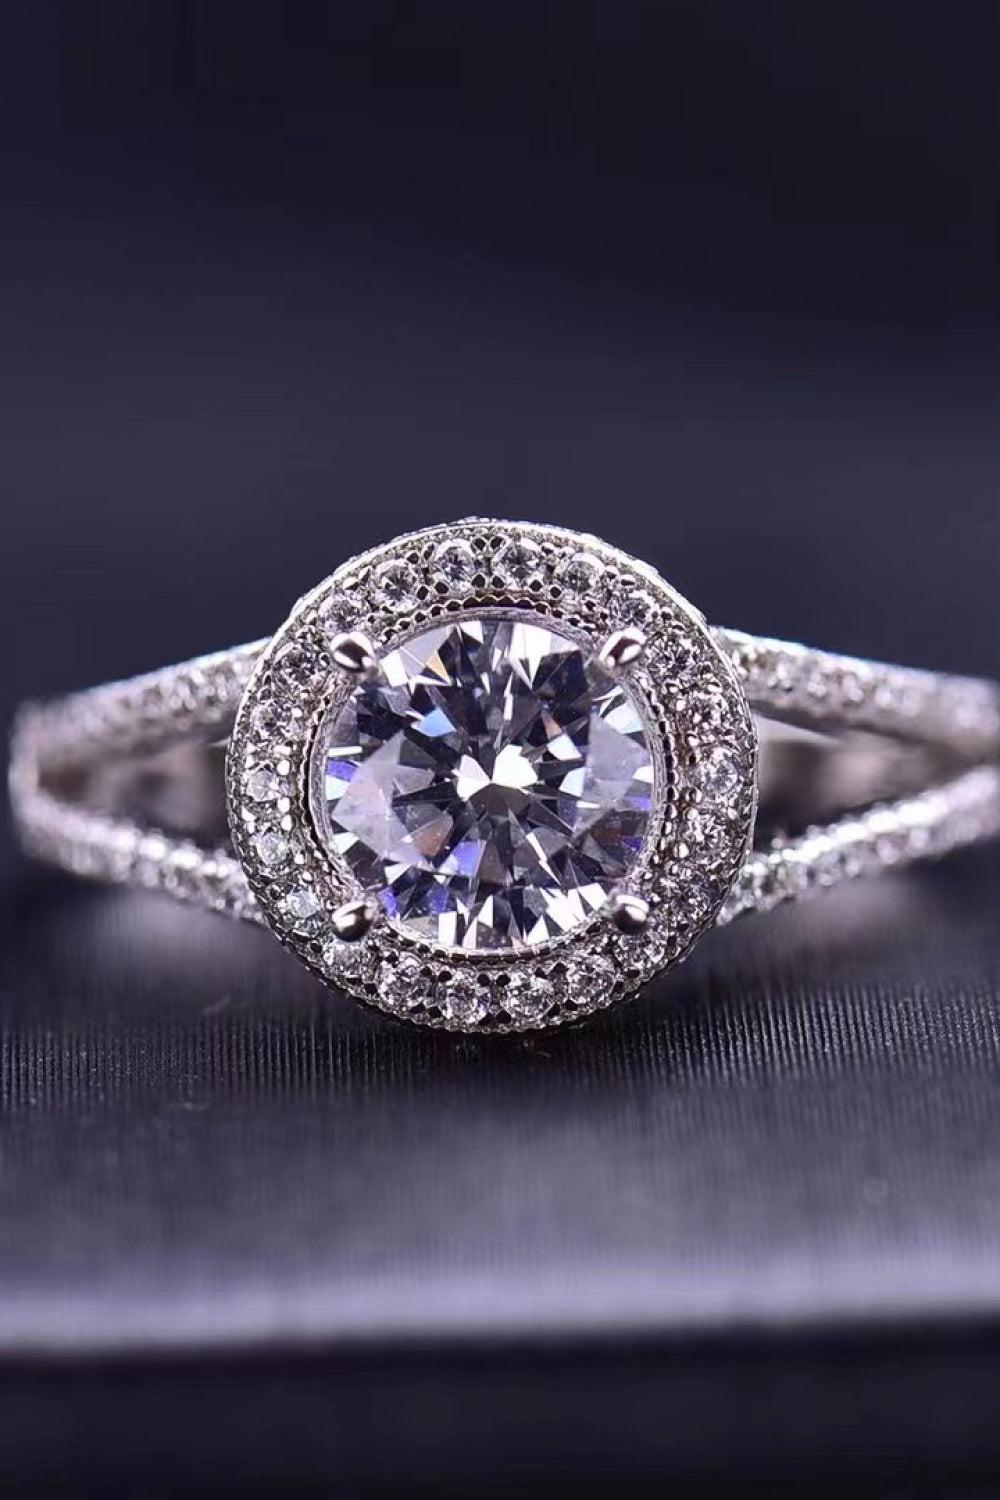 Shiny and Chic 2 Carat Moissanite Ring